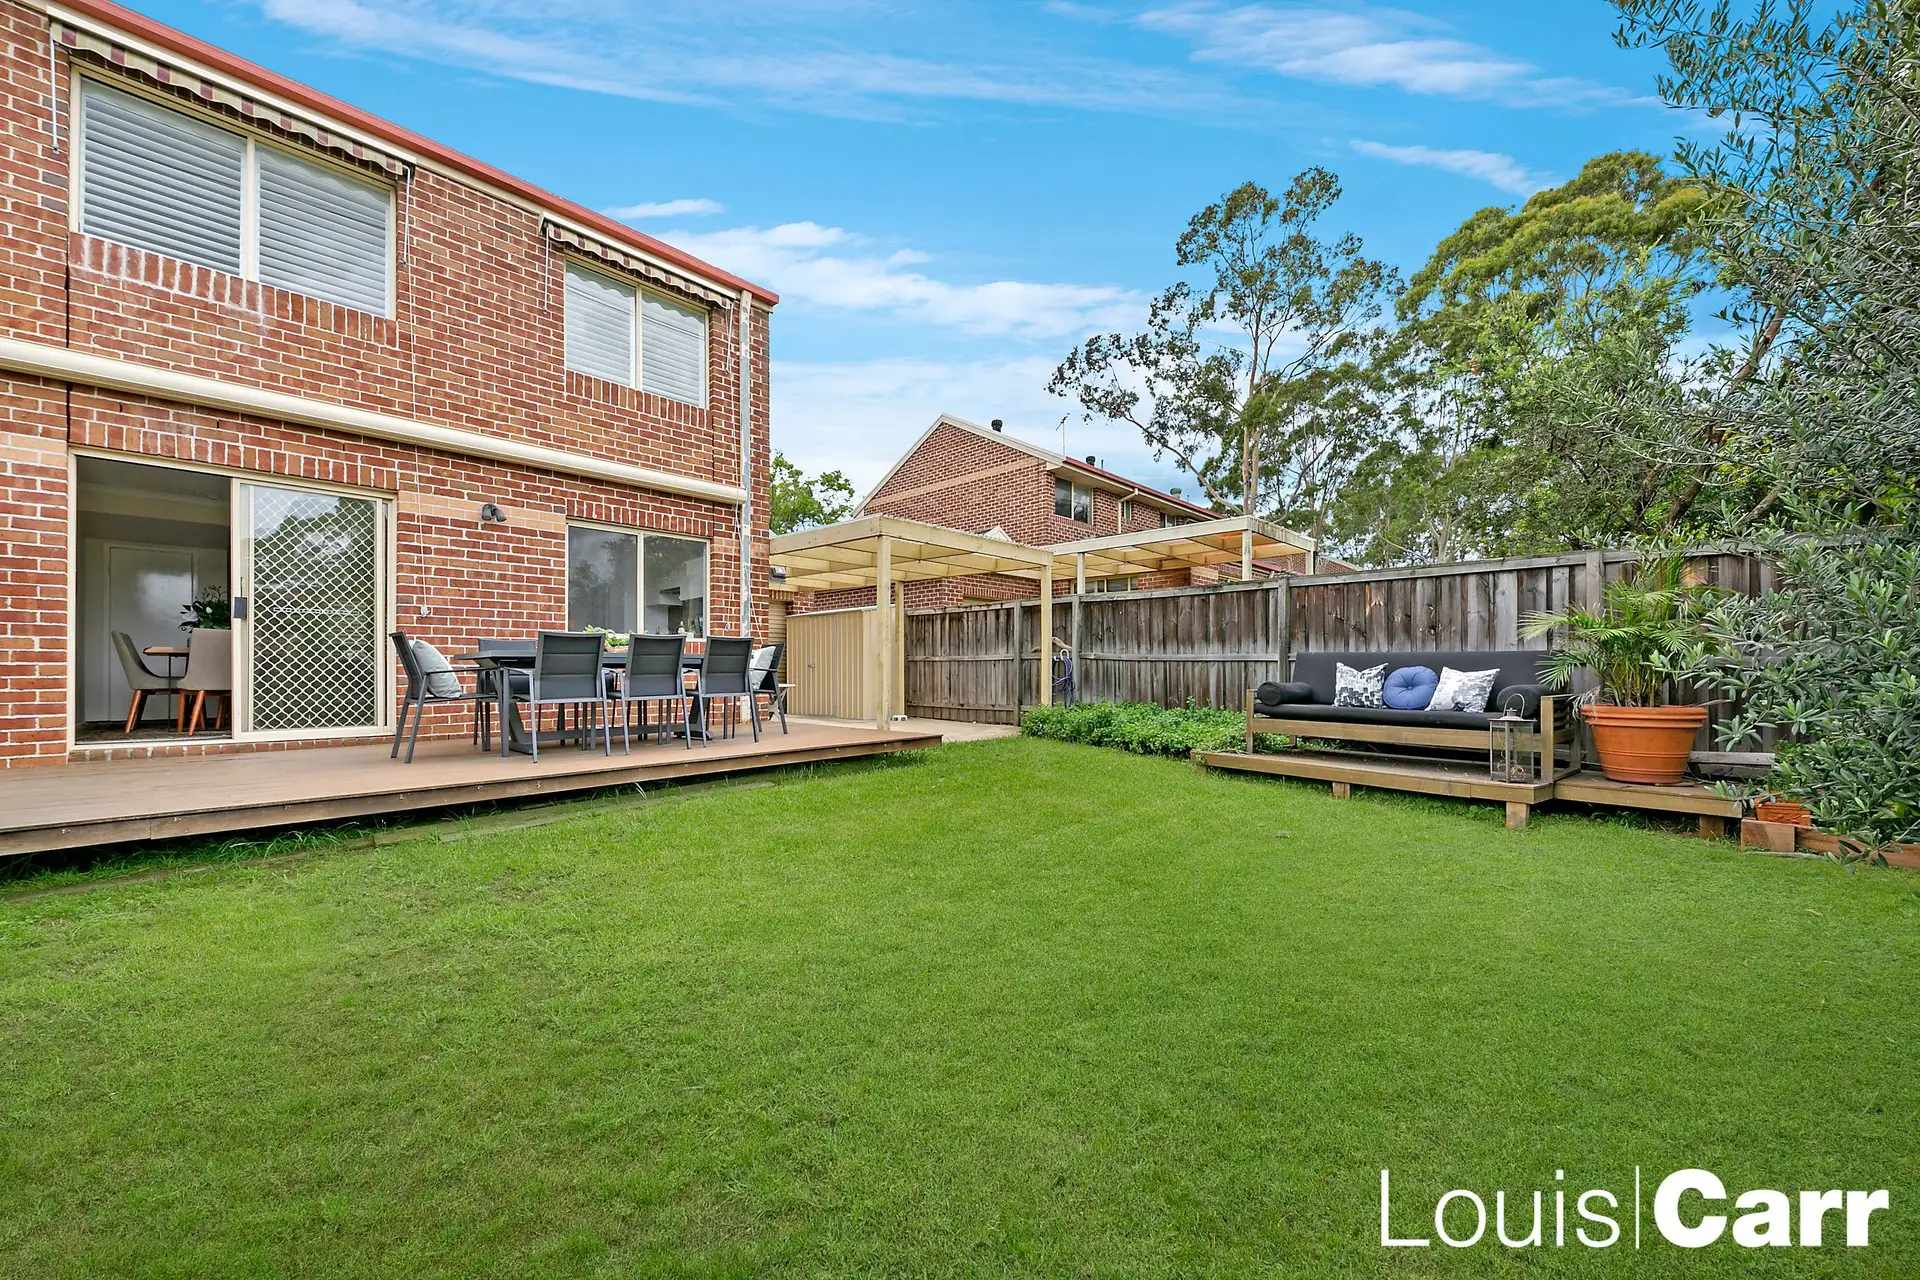 Photo #10: 22/10 View Street, West Pennant Hills - Sold by Louis Carr Real Estate